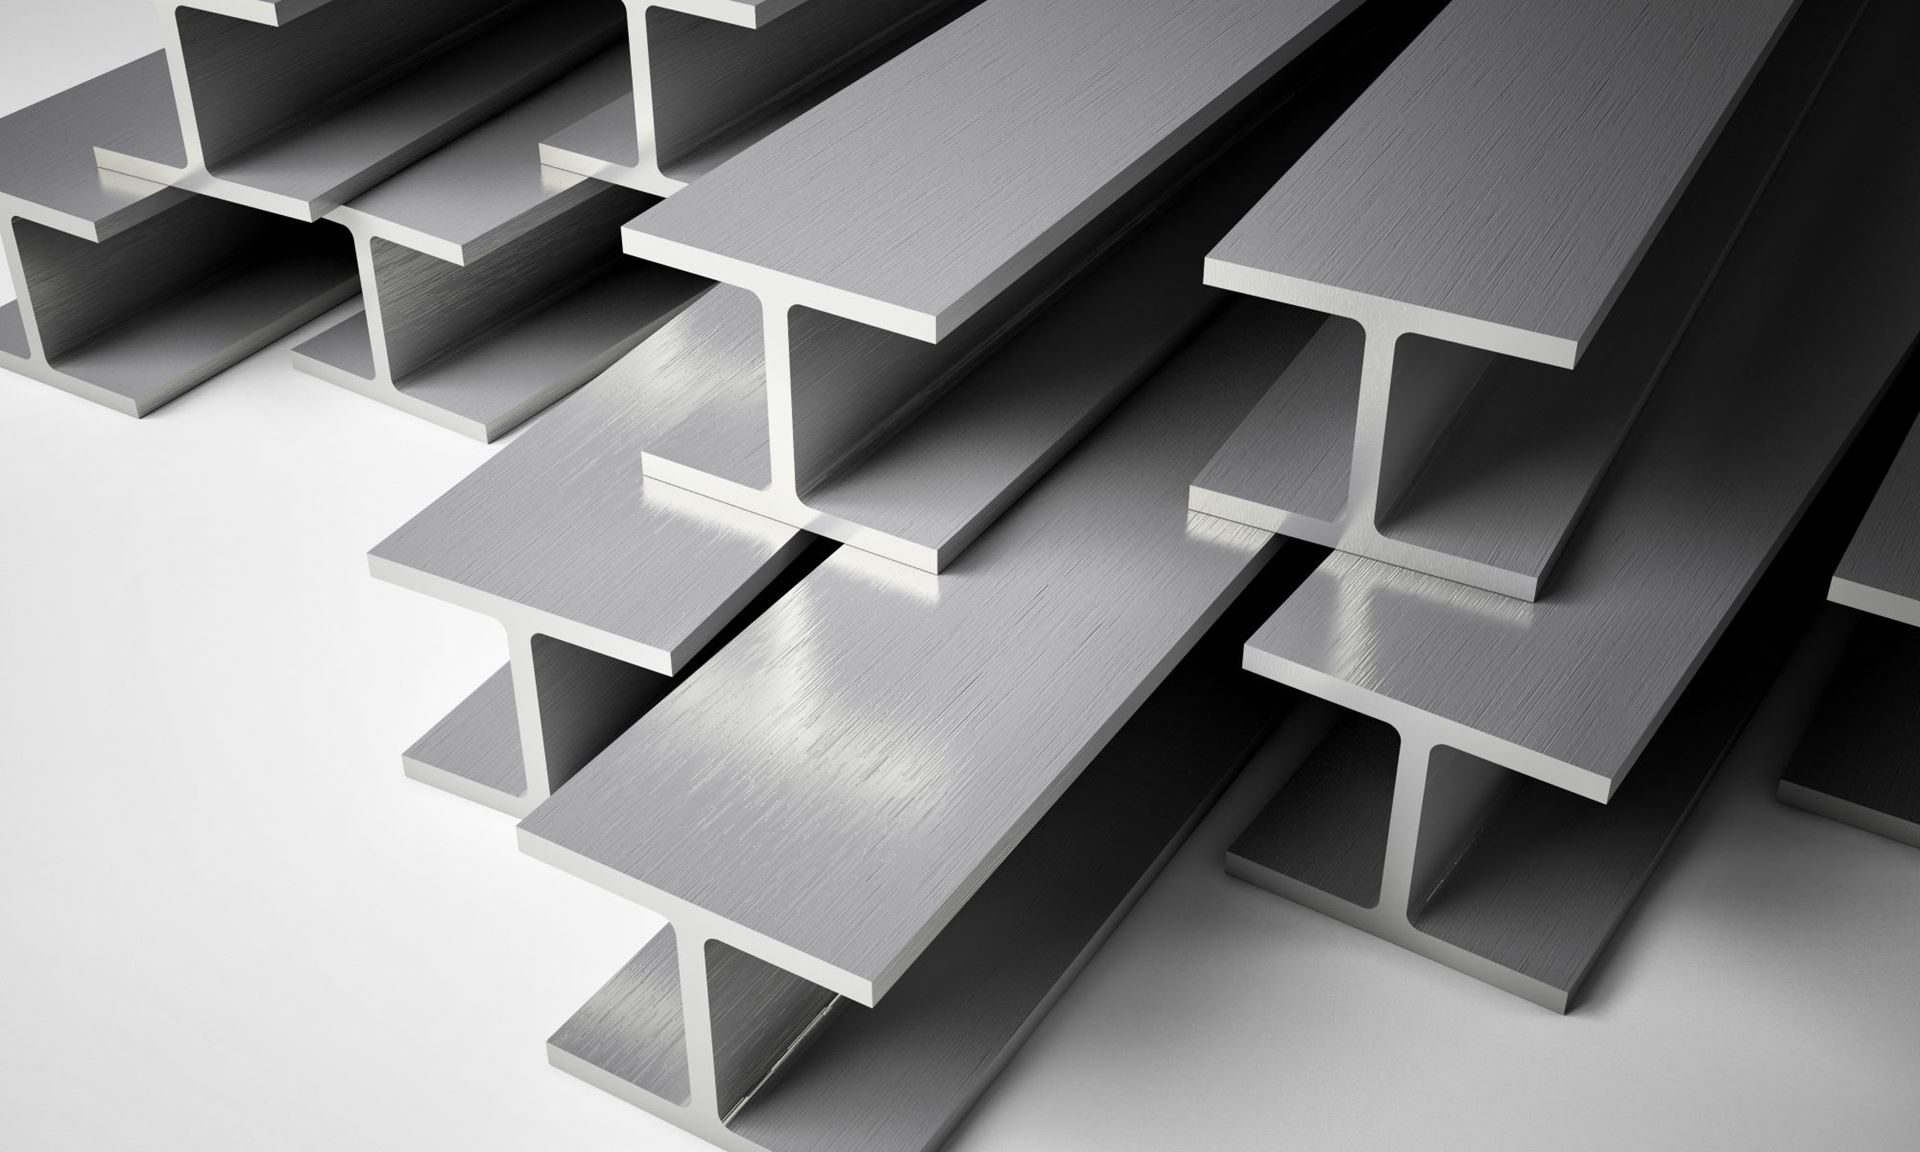 Tung Ho Steel implements price increase for h-beam base in latter February